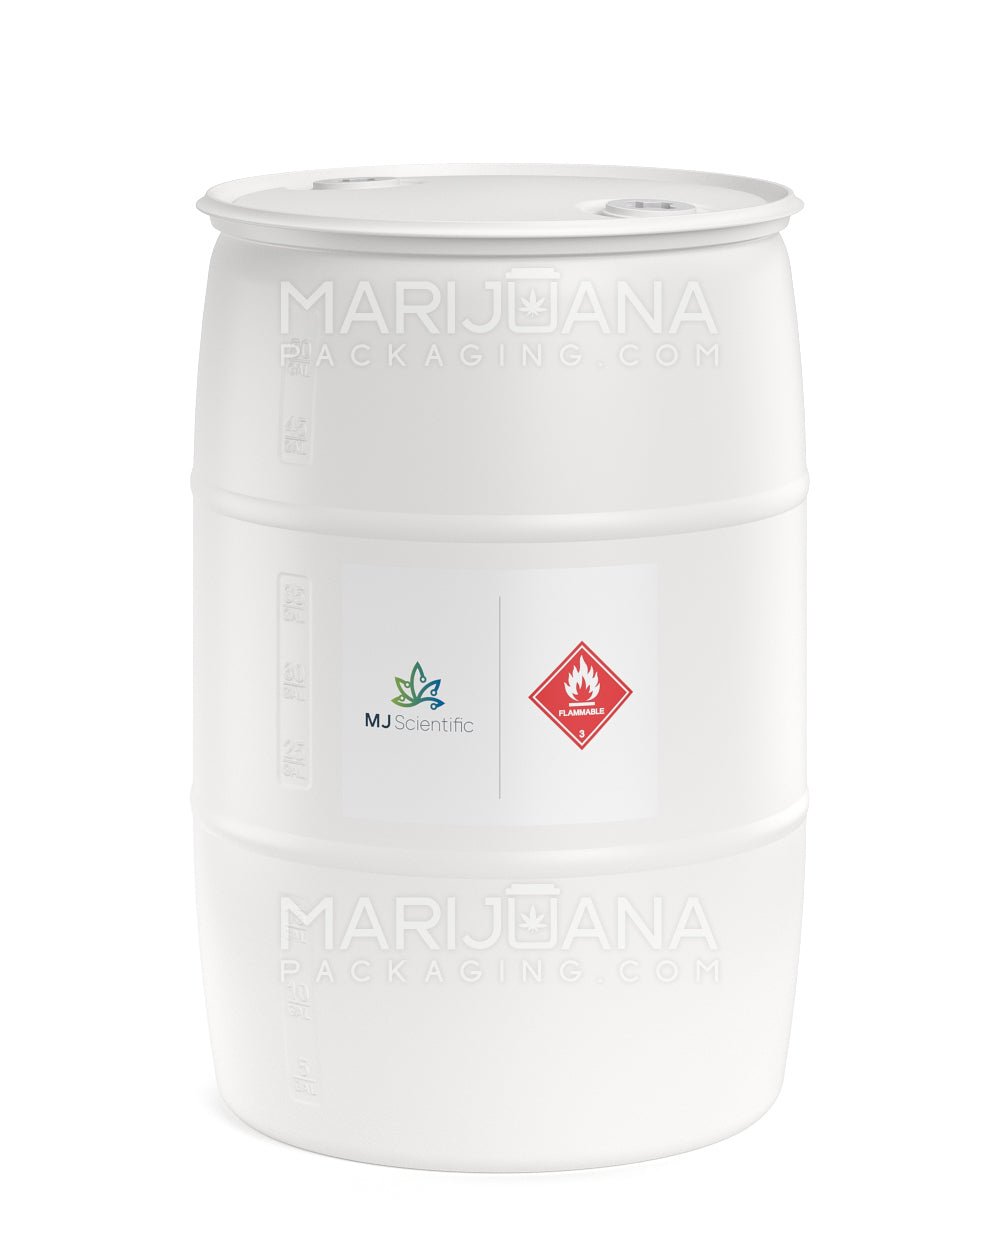 MJ SCIENTIFIC | Liquid Drum 99% Isopropyl Alcohol Tech Grade Cleaning & Extraction Solvent | 365lb Net - 55 Gallons - 1